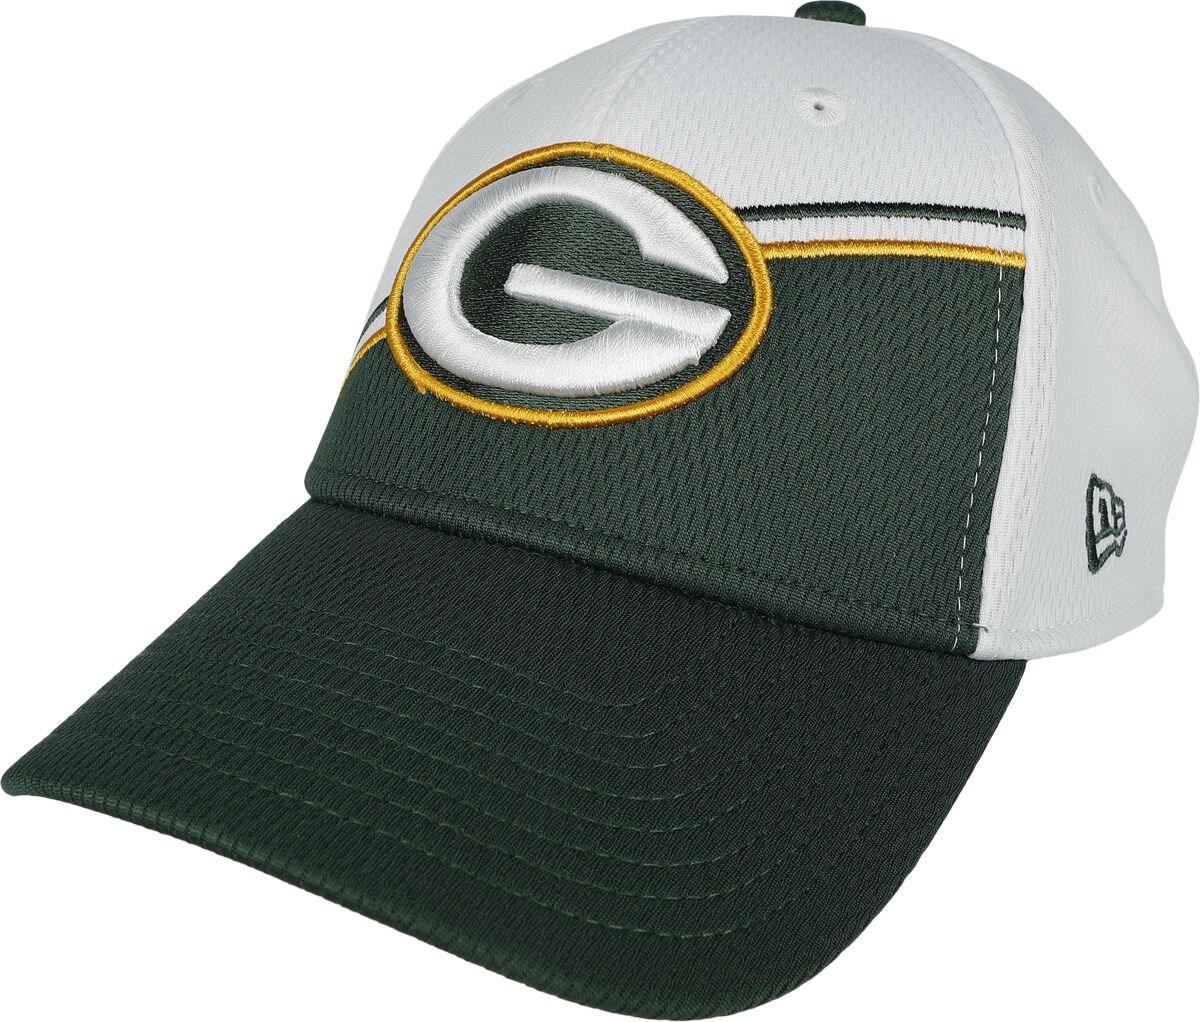 New Era - NFL Cap - 9FORTY Green Bay Packers Sideline - multicolor